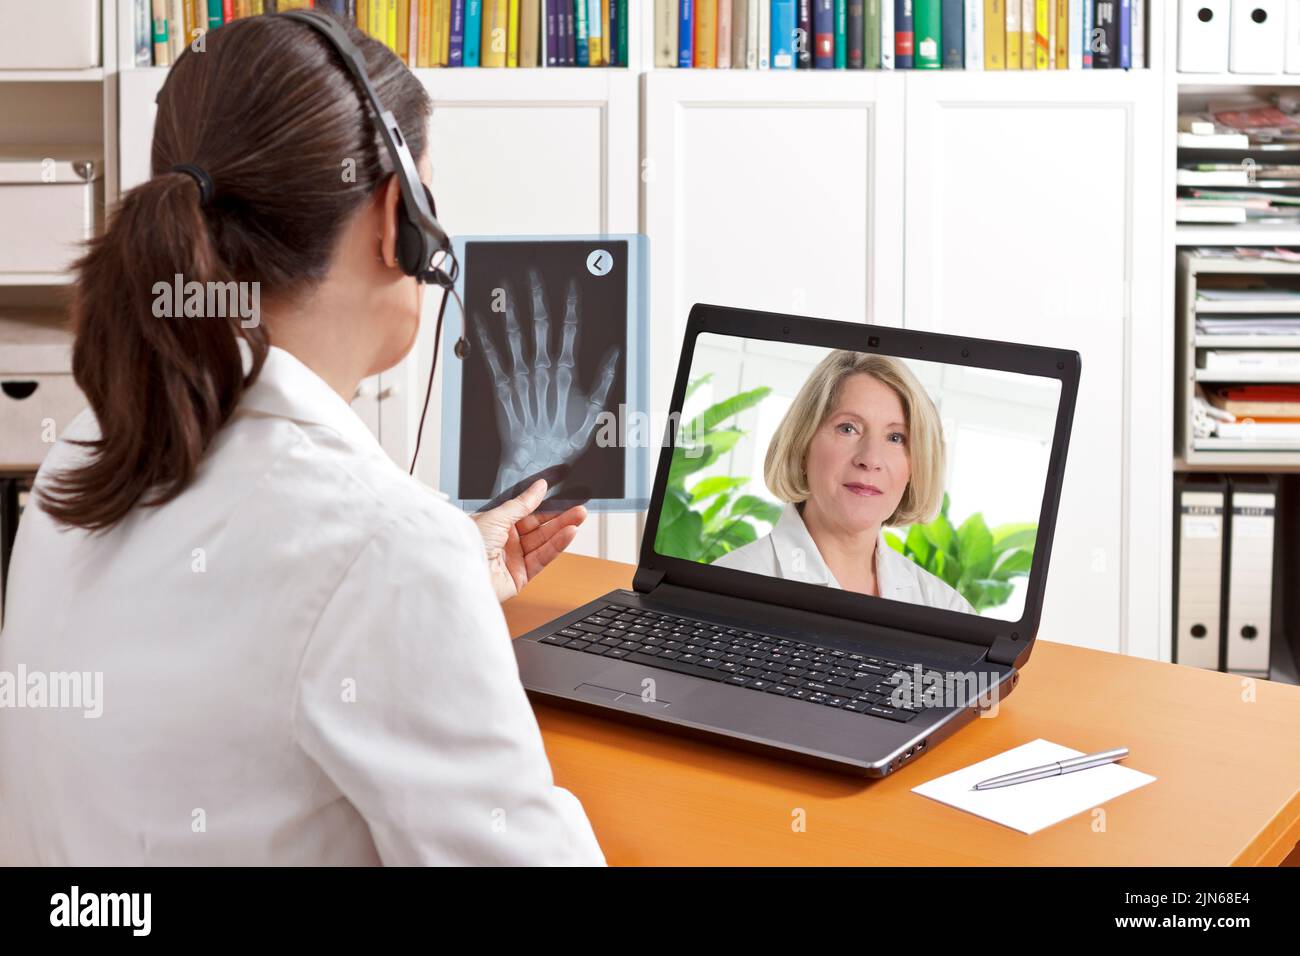 Telemedicine concept: two doctors or pharmacists during a medical video conference about x-ray results. Stock Photo